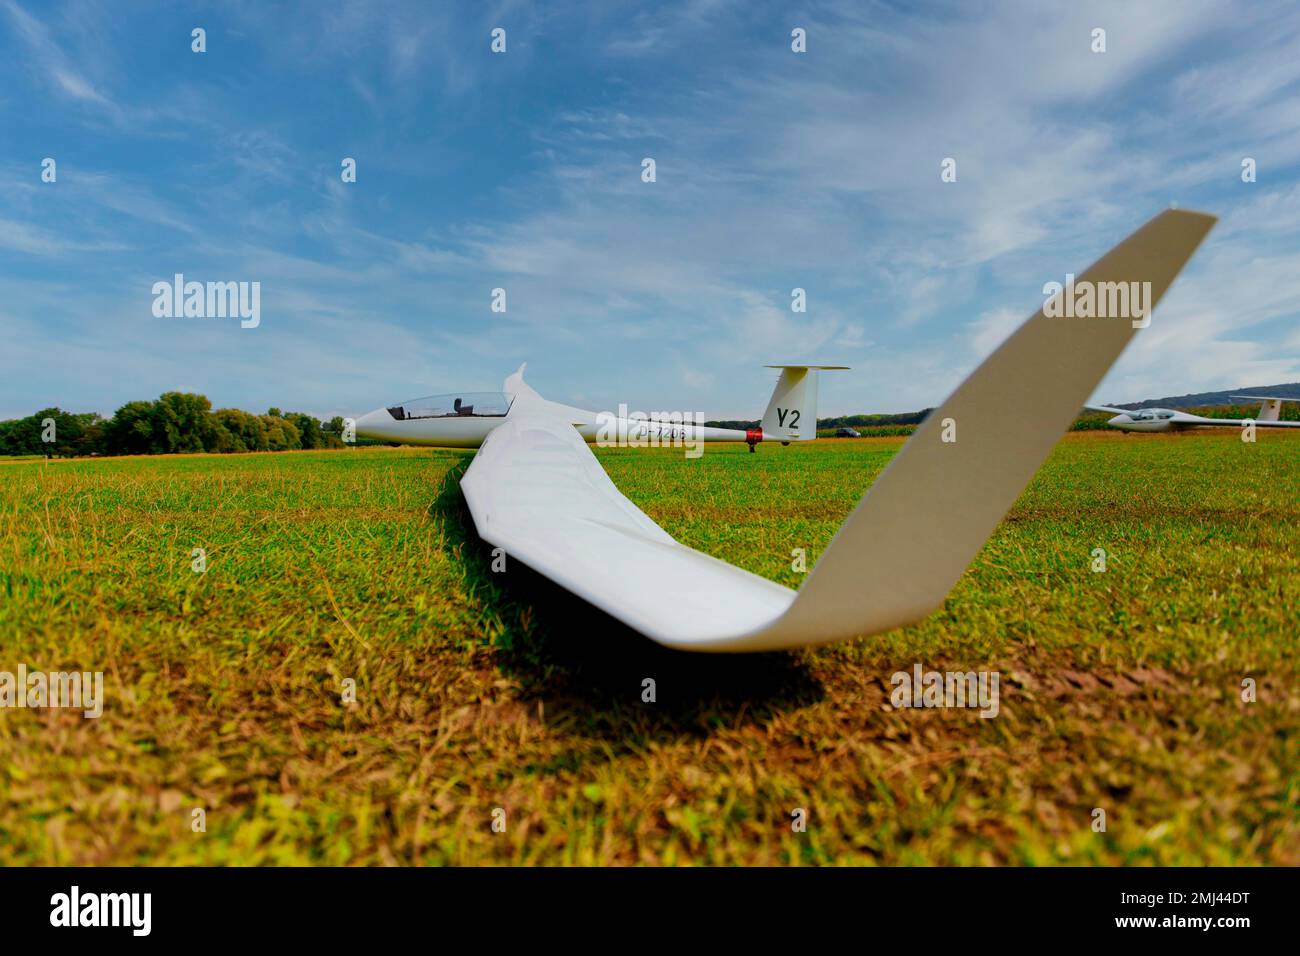 Glider on a runway Stock Photo